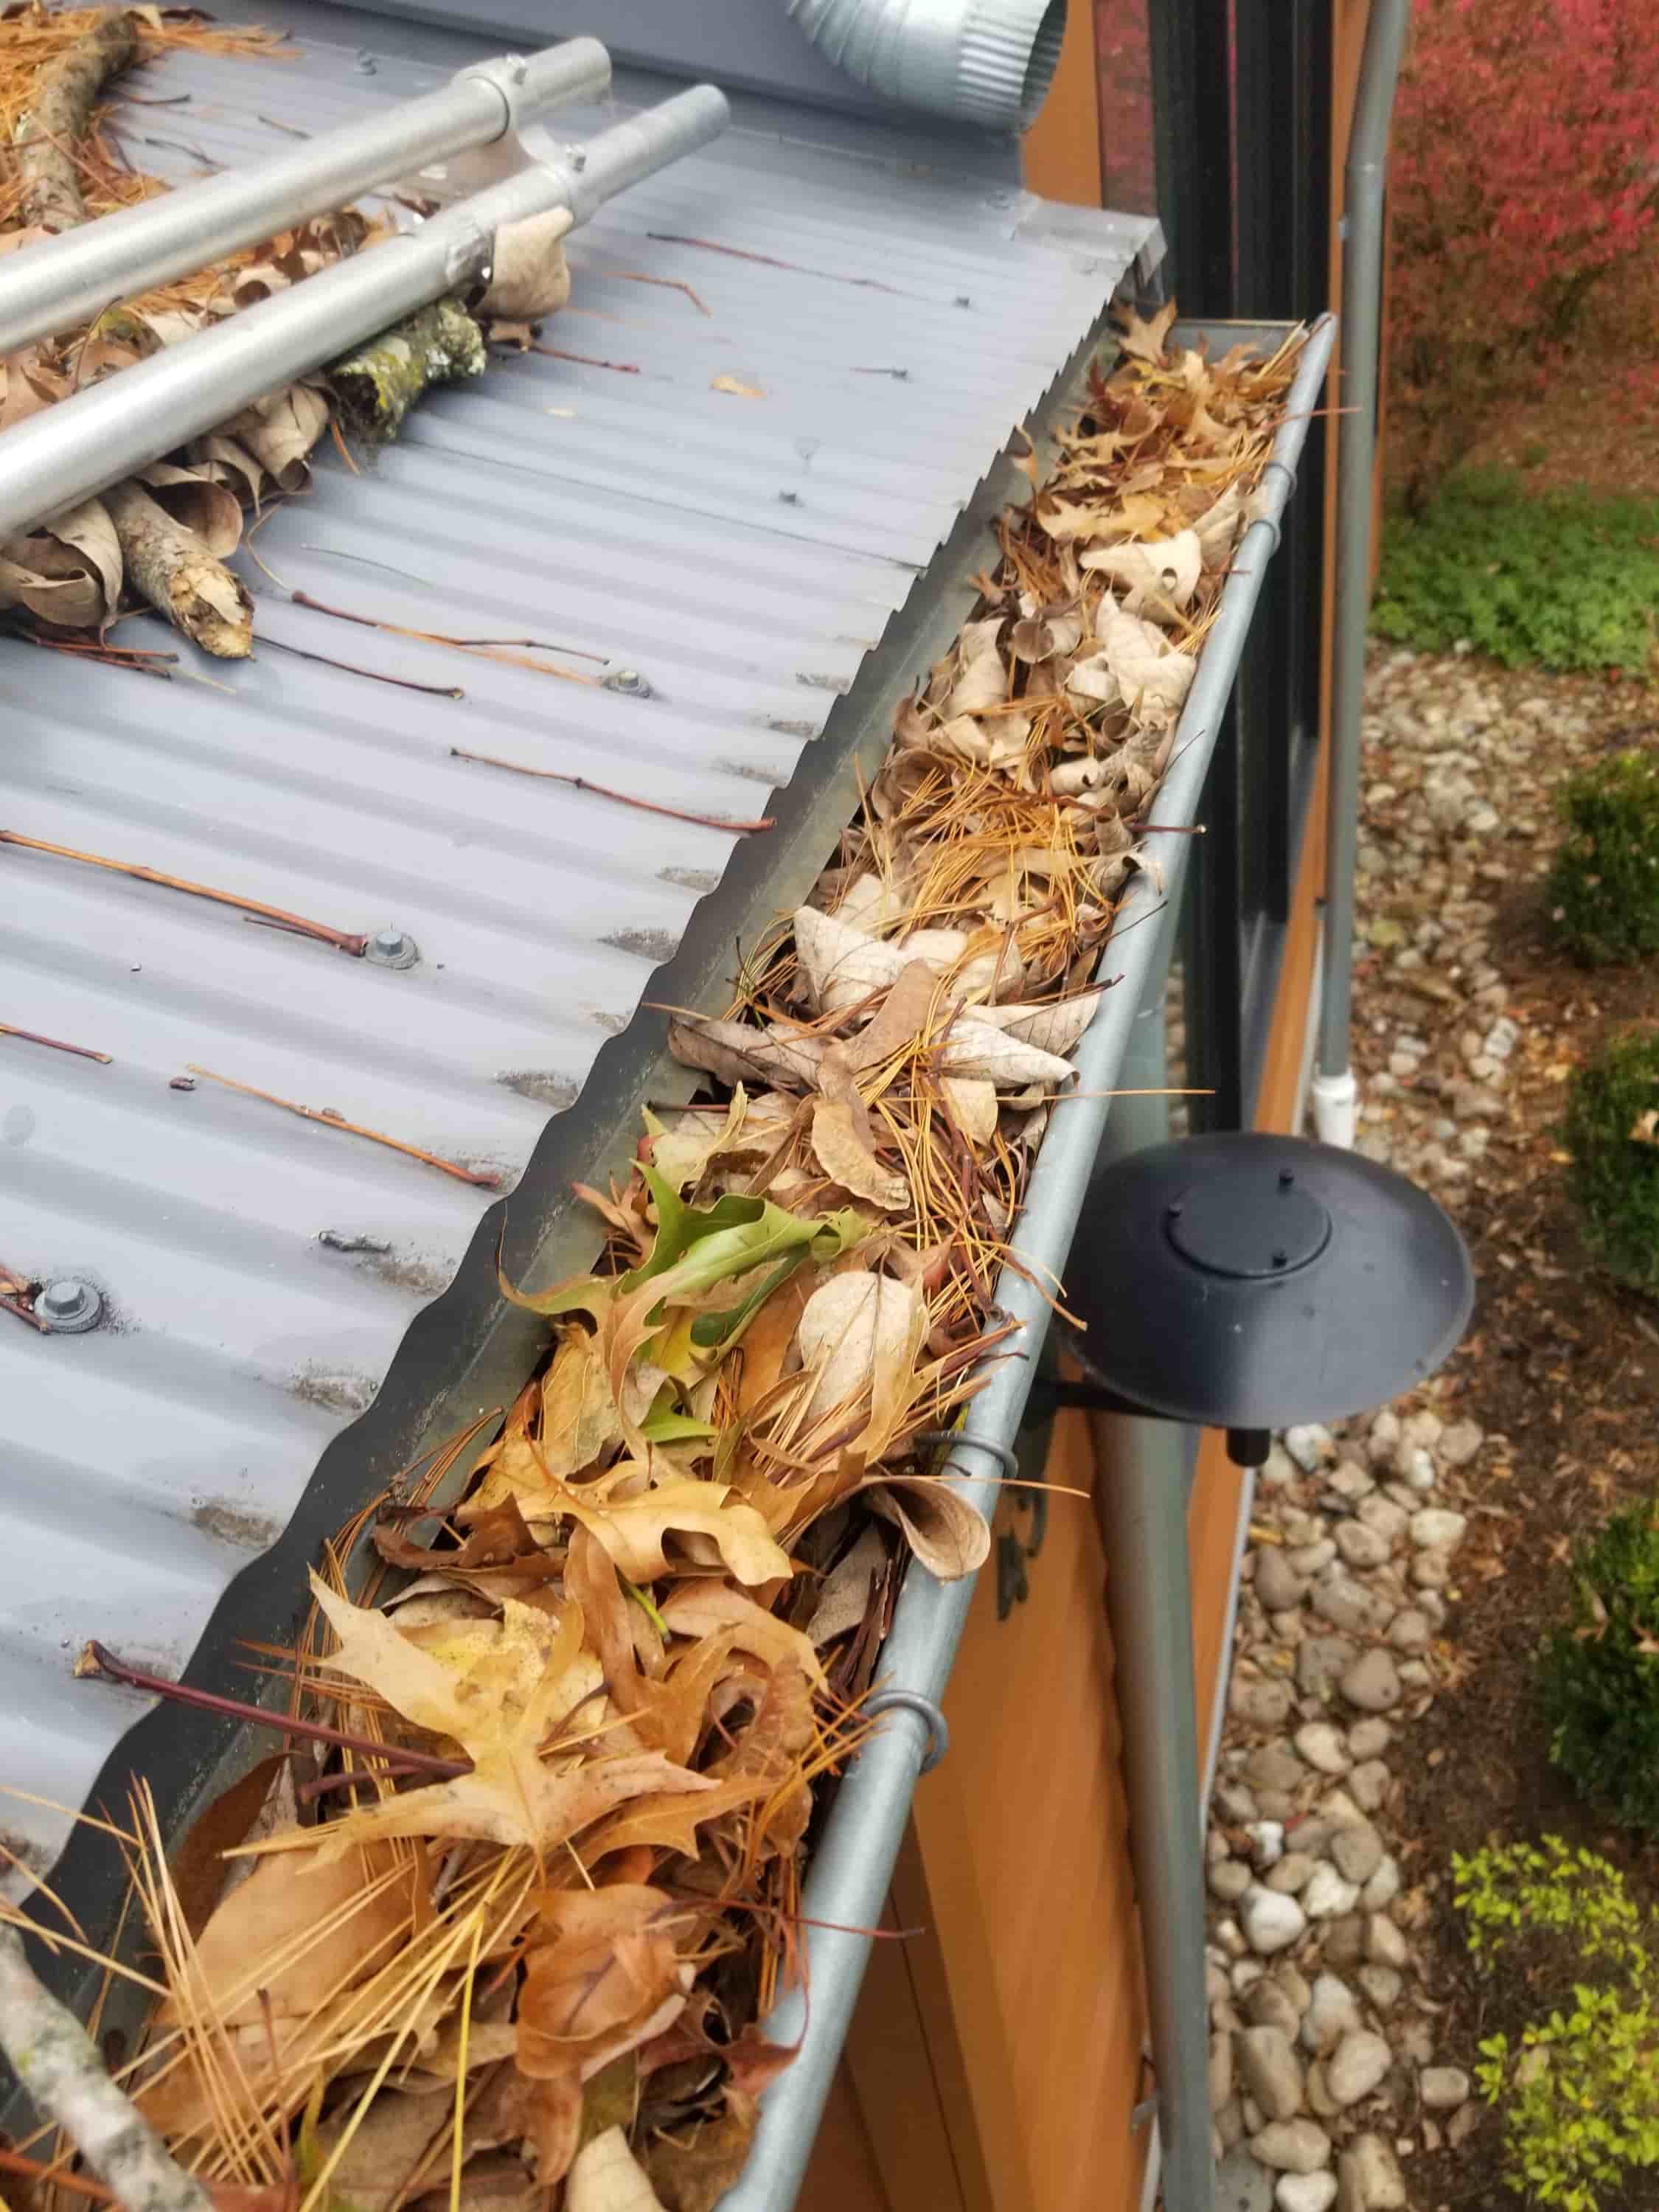 how to estimate gutter cleaning1800 gutters